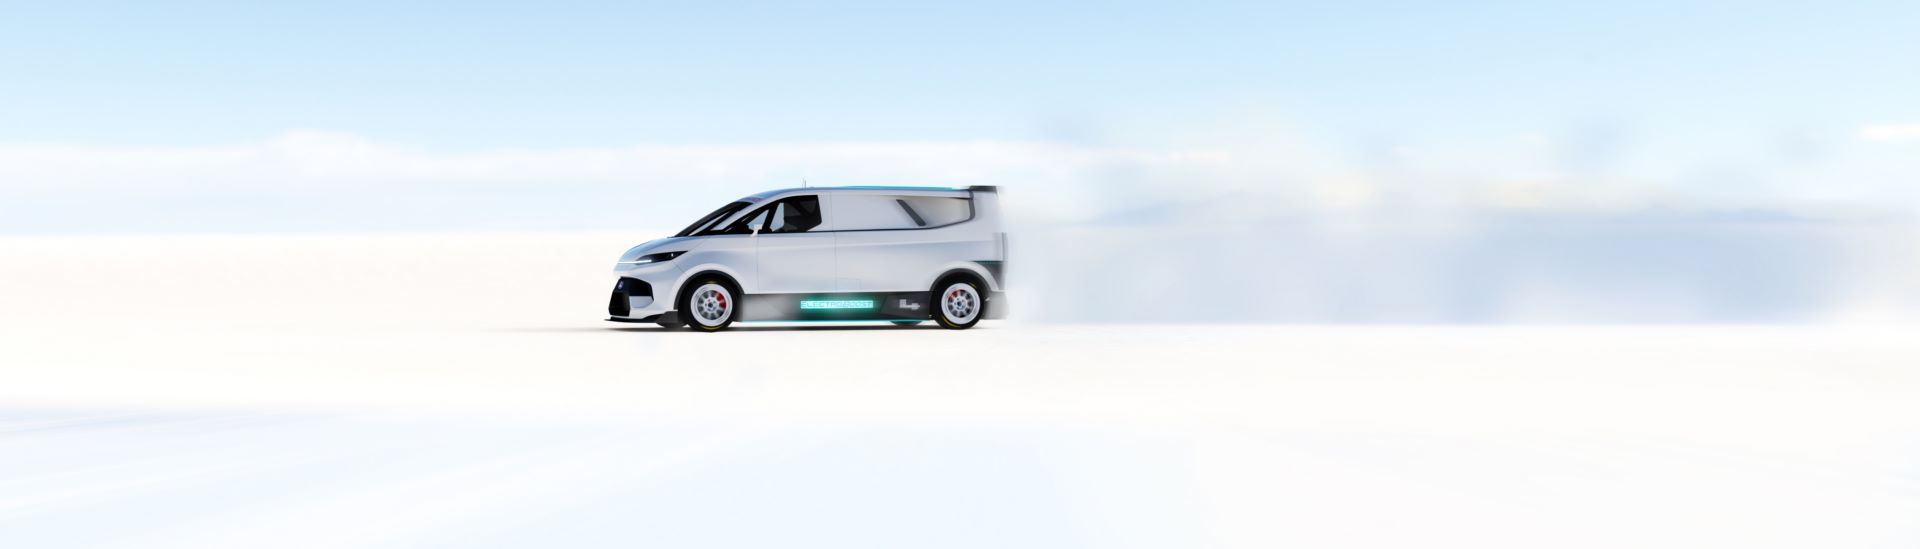 Ford-Electric-SuperVan-43